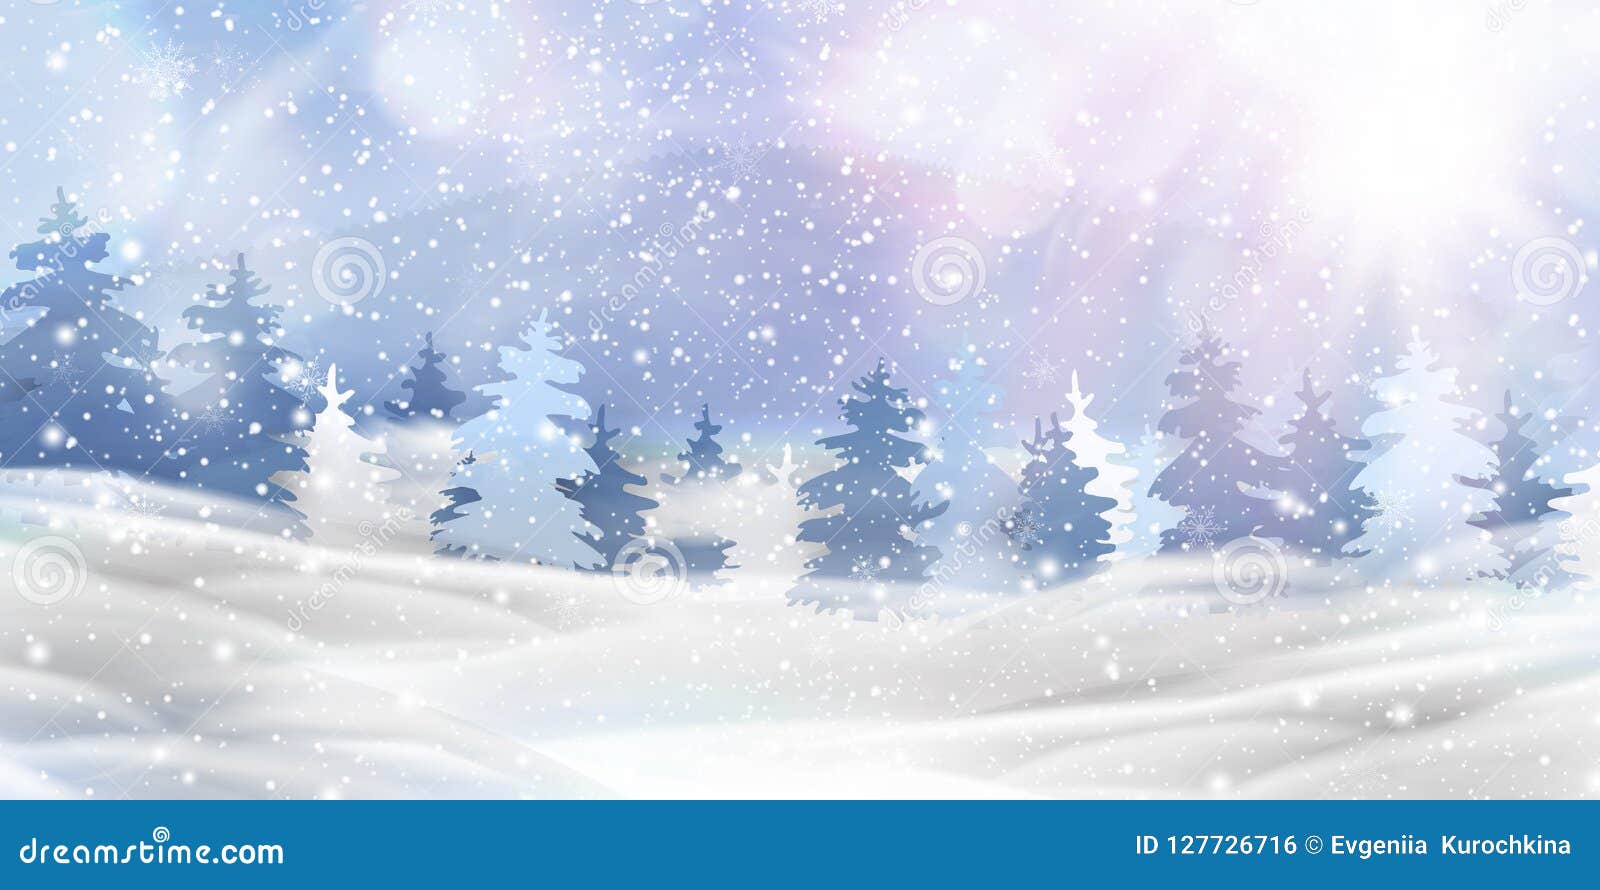 beautiful christmas, snowy woodland landscape with snow covered firs, coniferous forest, falling snow, snowflakes for